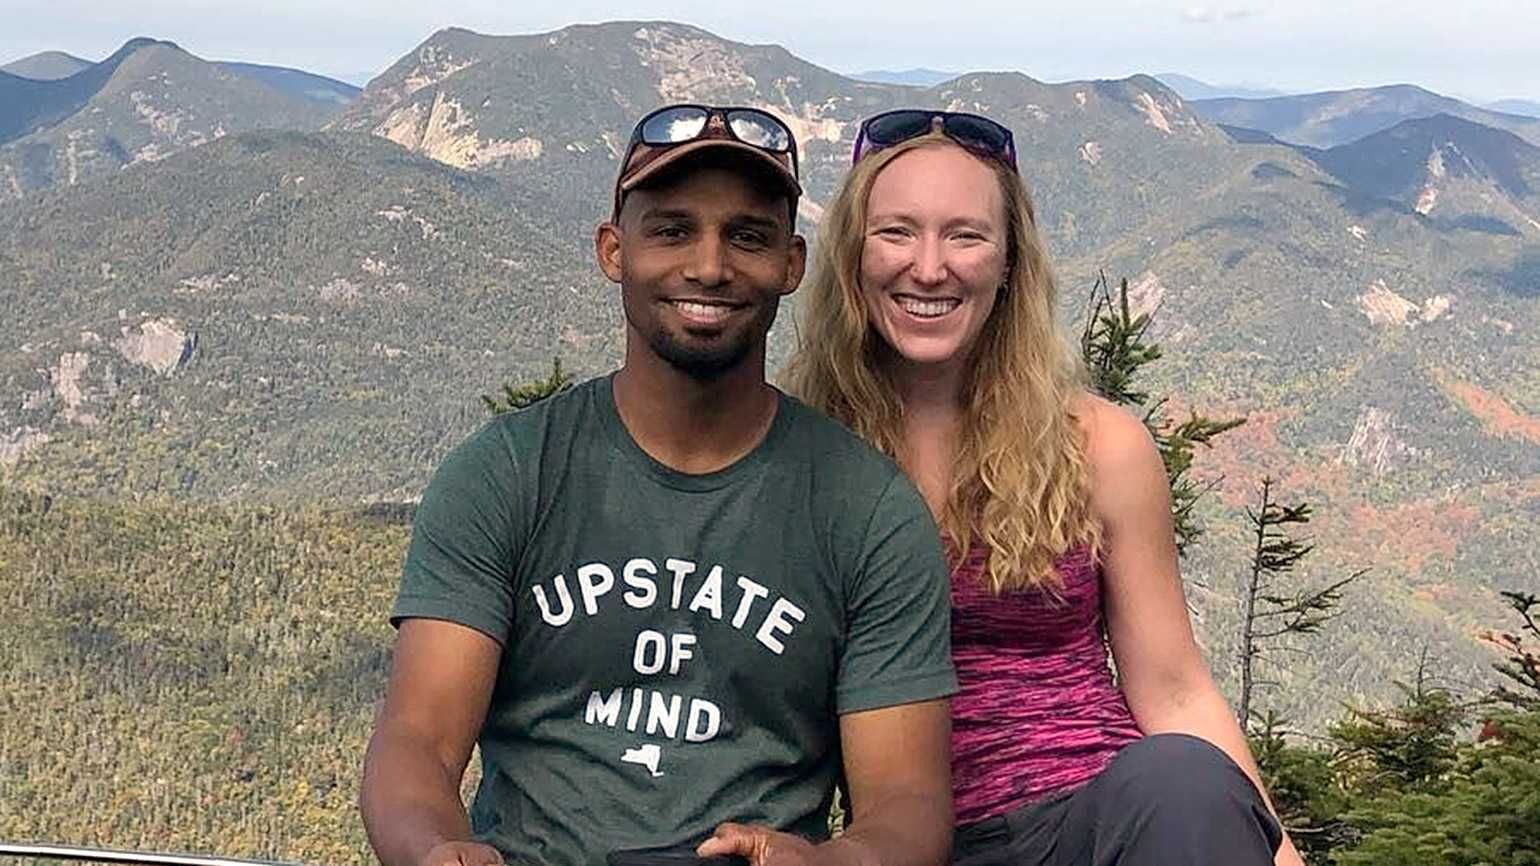 Rebecca Benjamin and her husband, Mike, on a mountaintop sharing their god encounter and story of faith